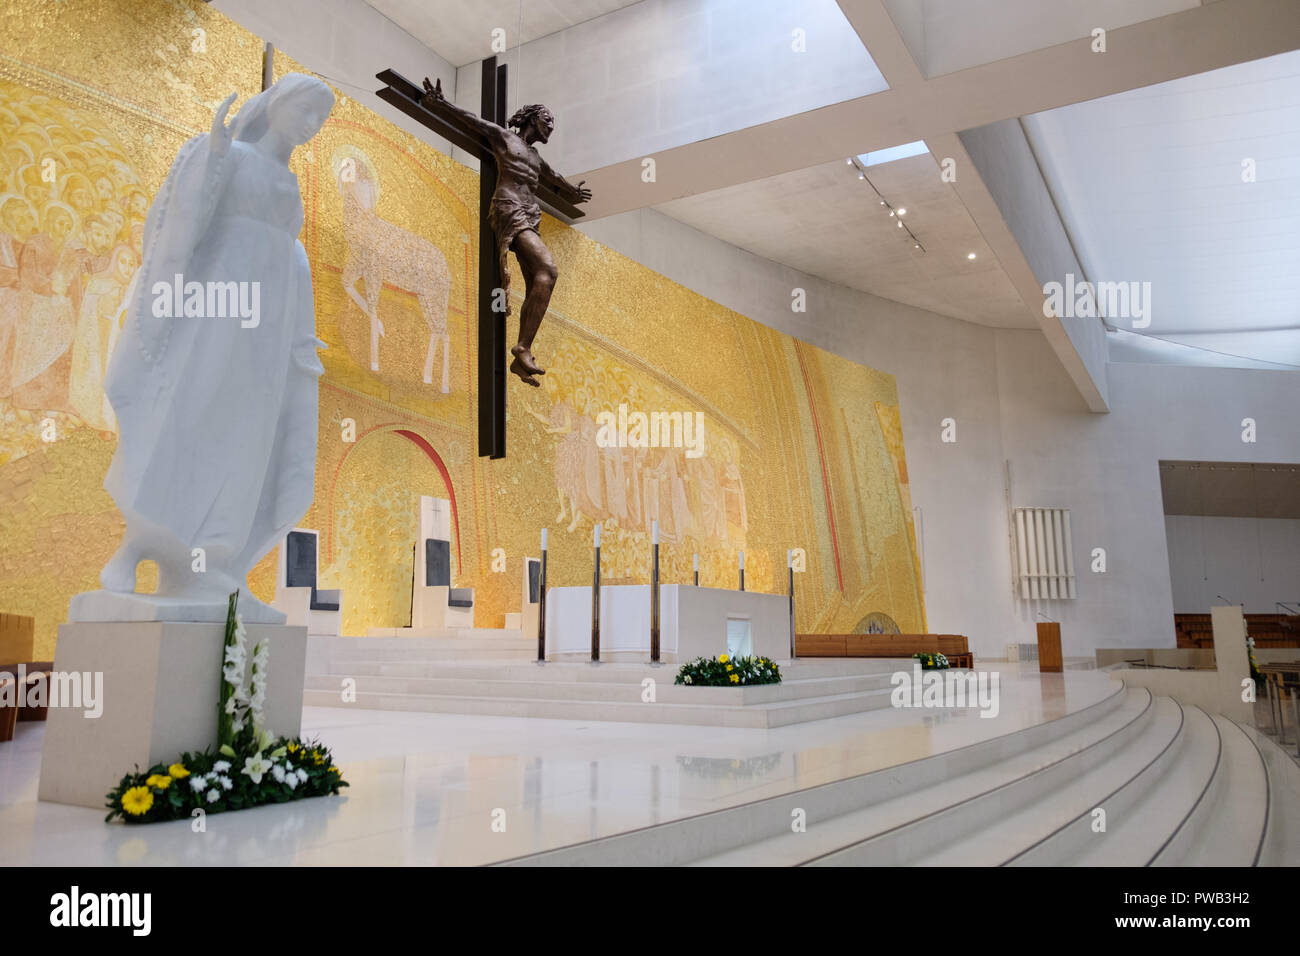 Altar of the Basilica of the Holy Trinity at the Sanctuary of Our Lady of Fatima, in Fátima, Portugal, Europe Stock Photo